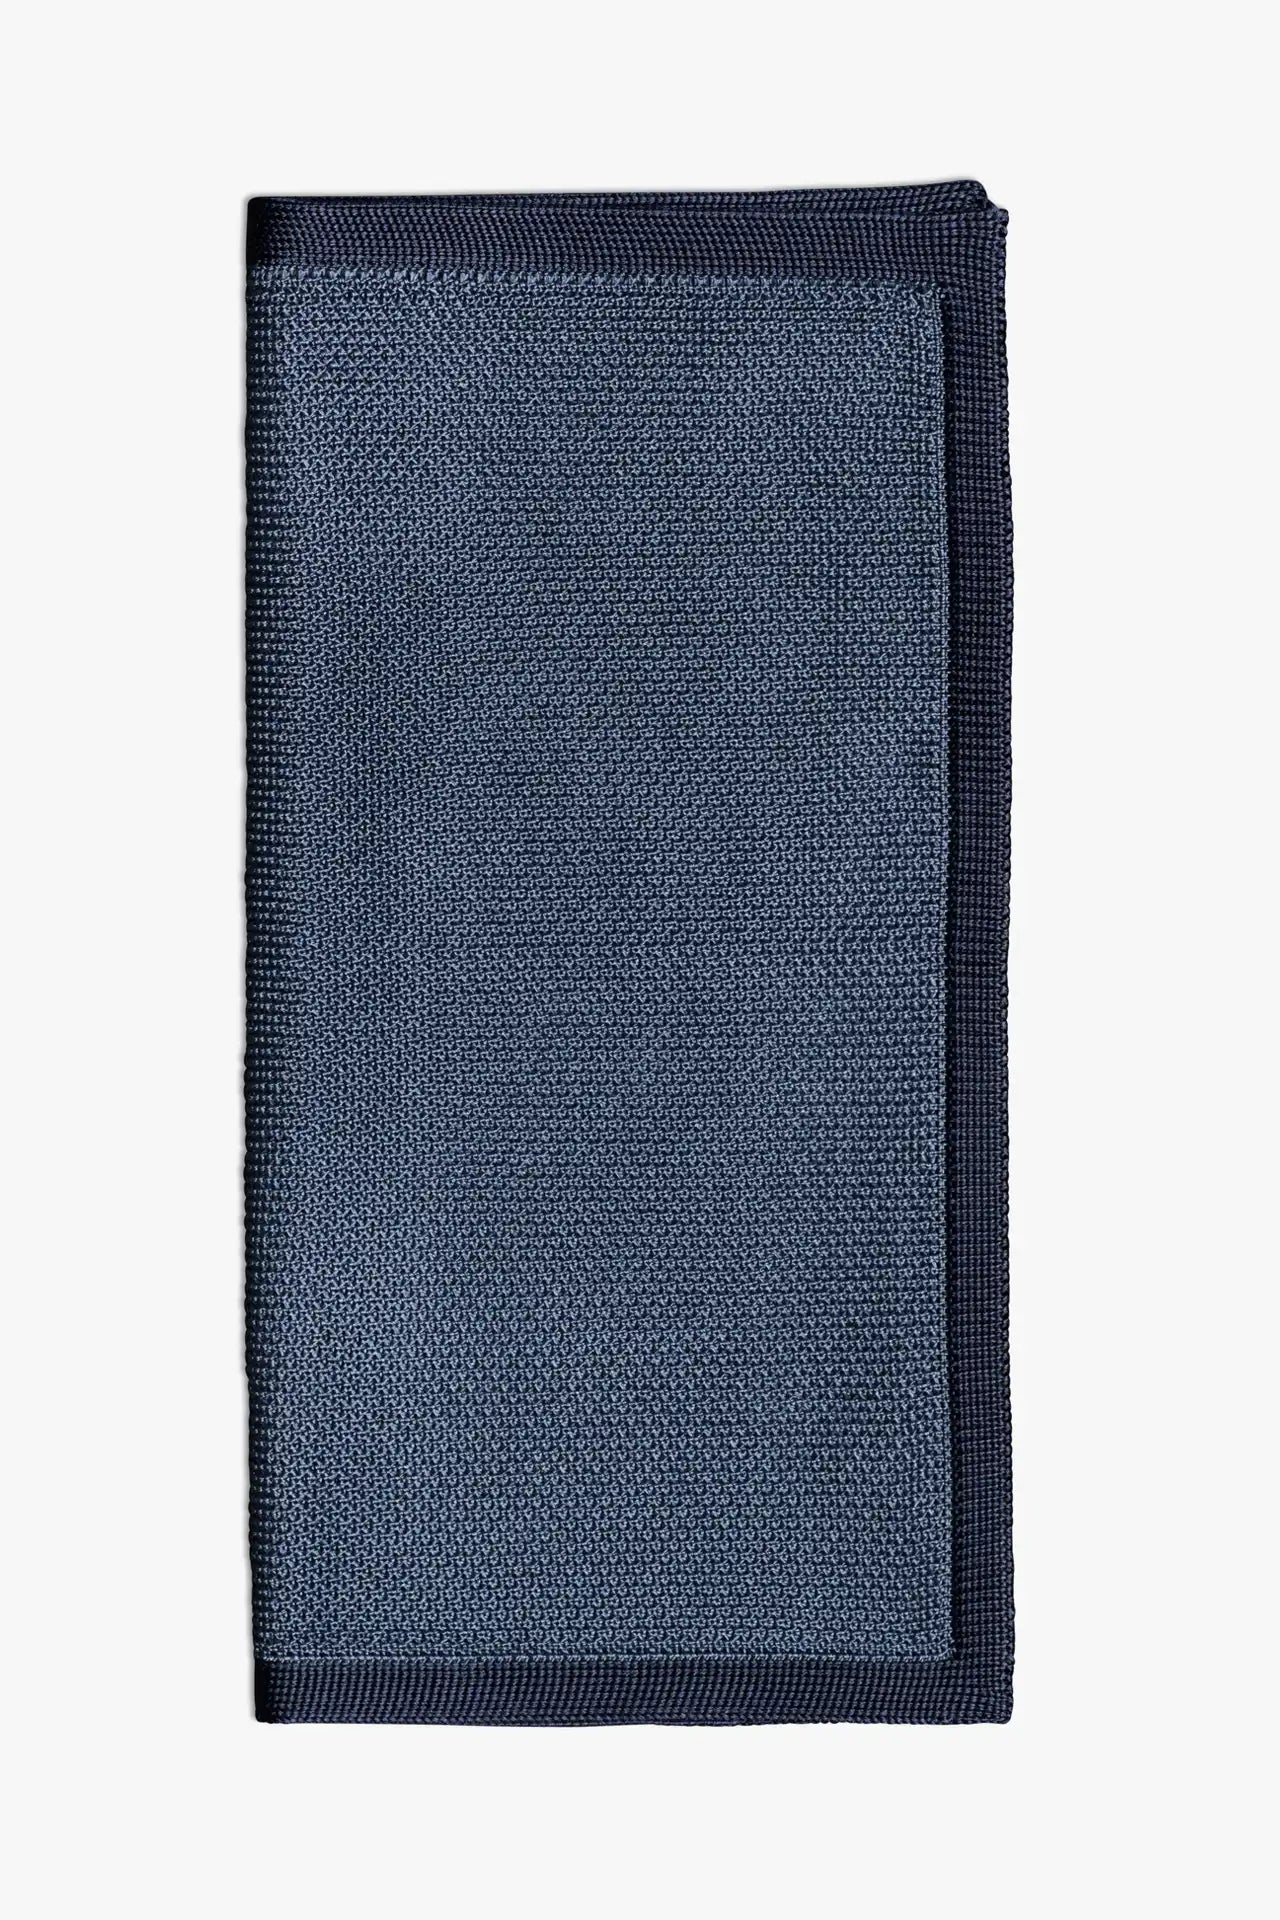 Blue knitted pocket square with navy blue boarder. Made of silk in Italy paired with Matching tie.